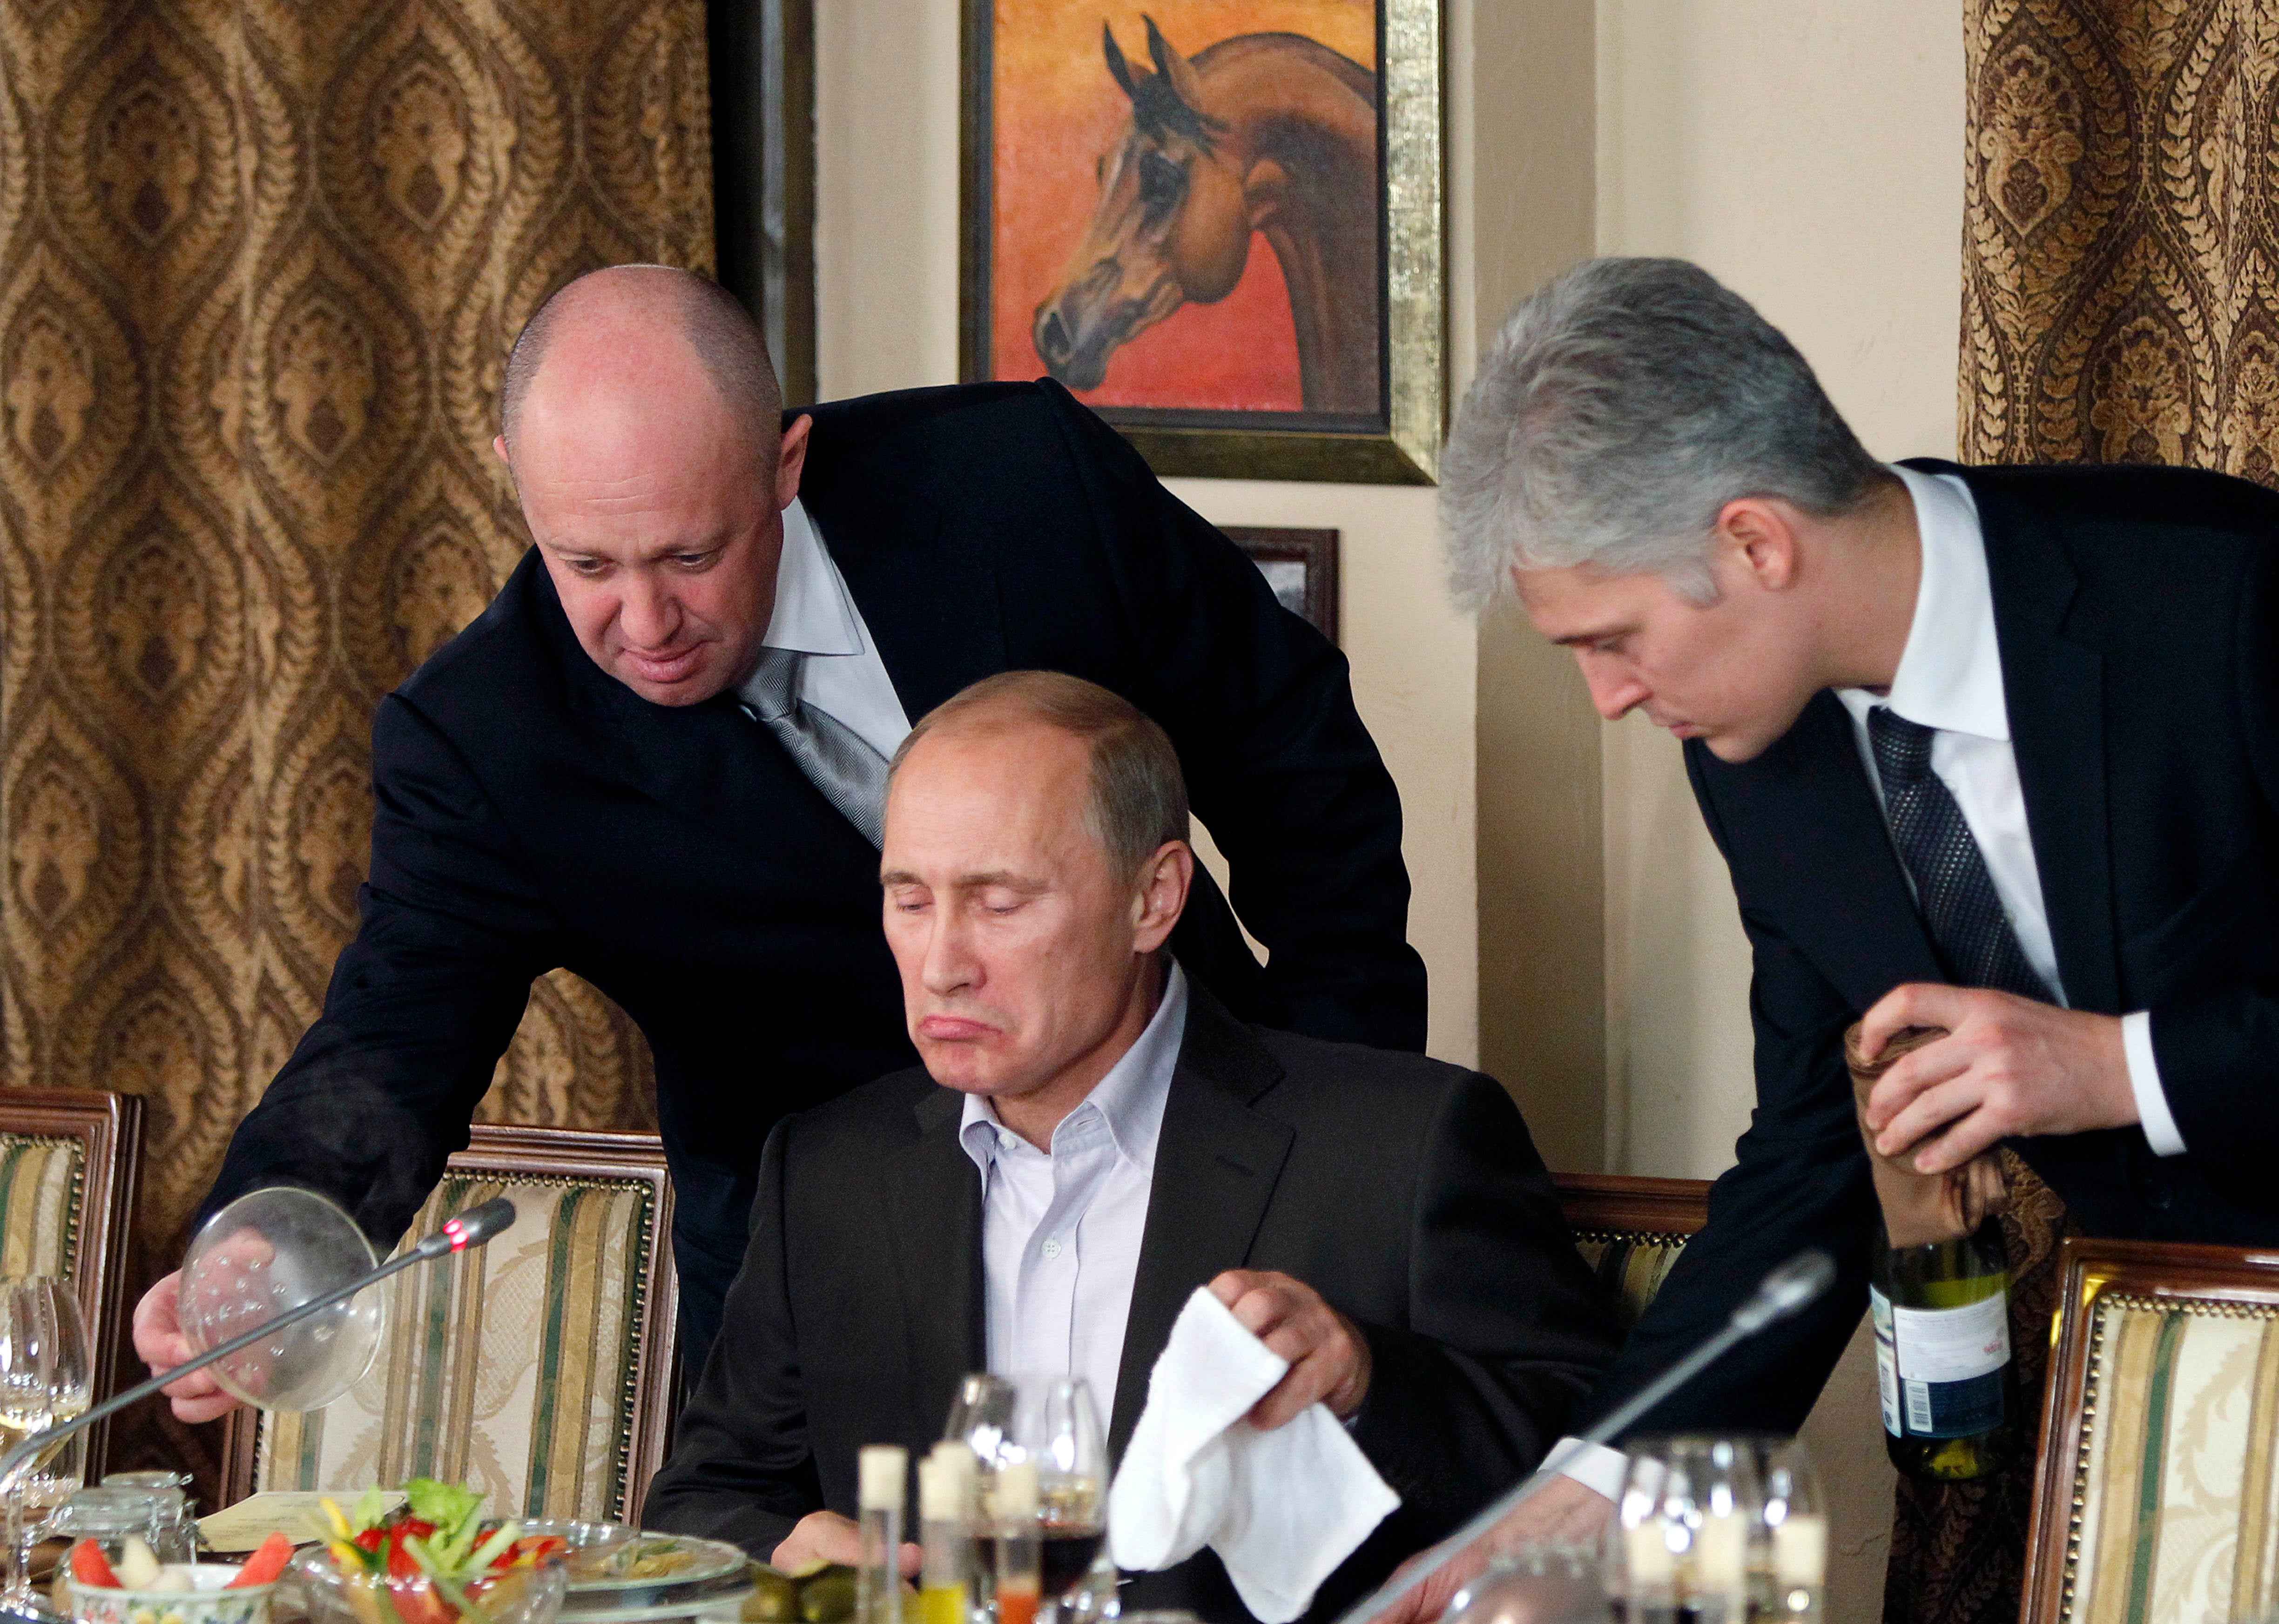 Former businessman Prigozhin had been a close ally of Putin before his armed uprising